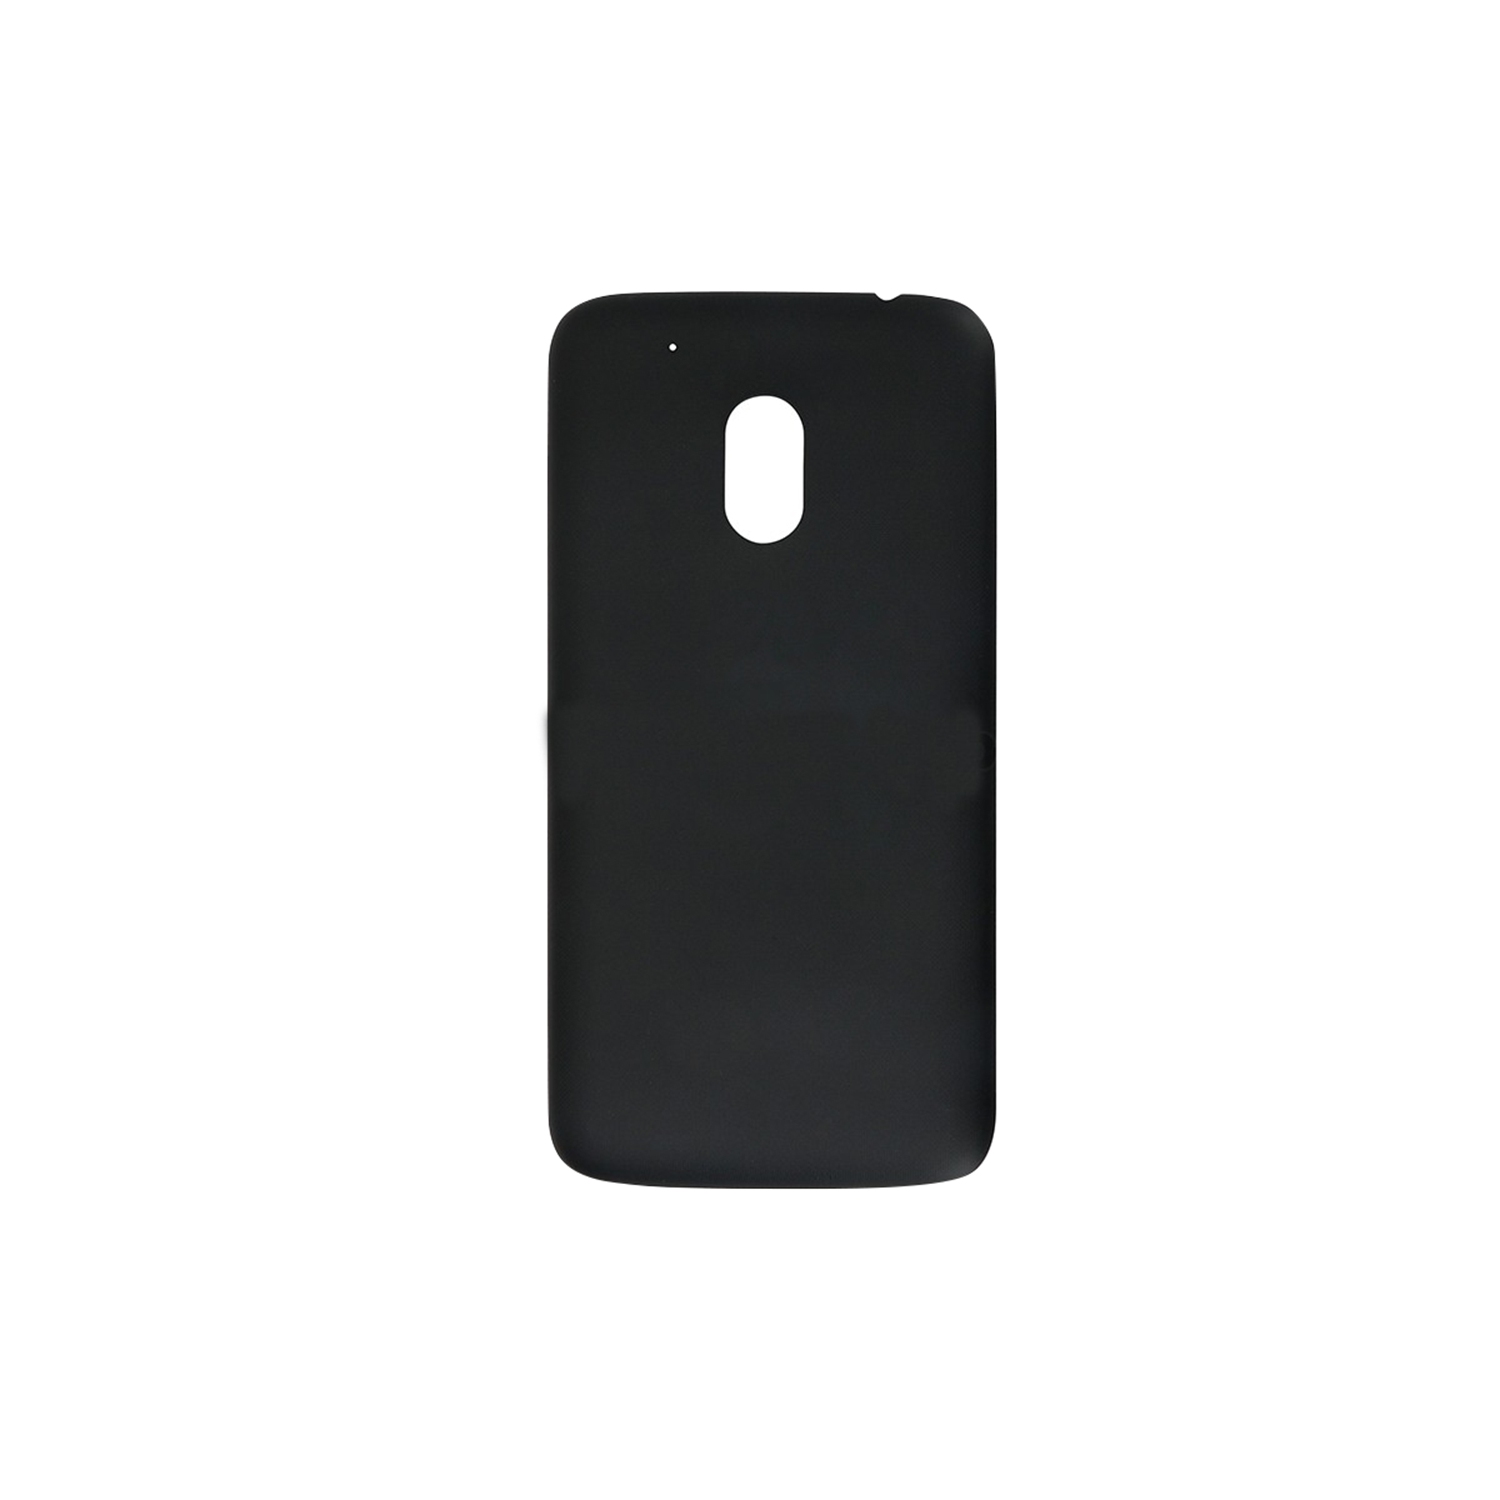 Replacement Battery Back Housing Cover Compatible With Motorola Moto G4 Play - Black